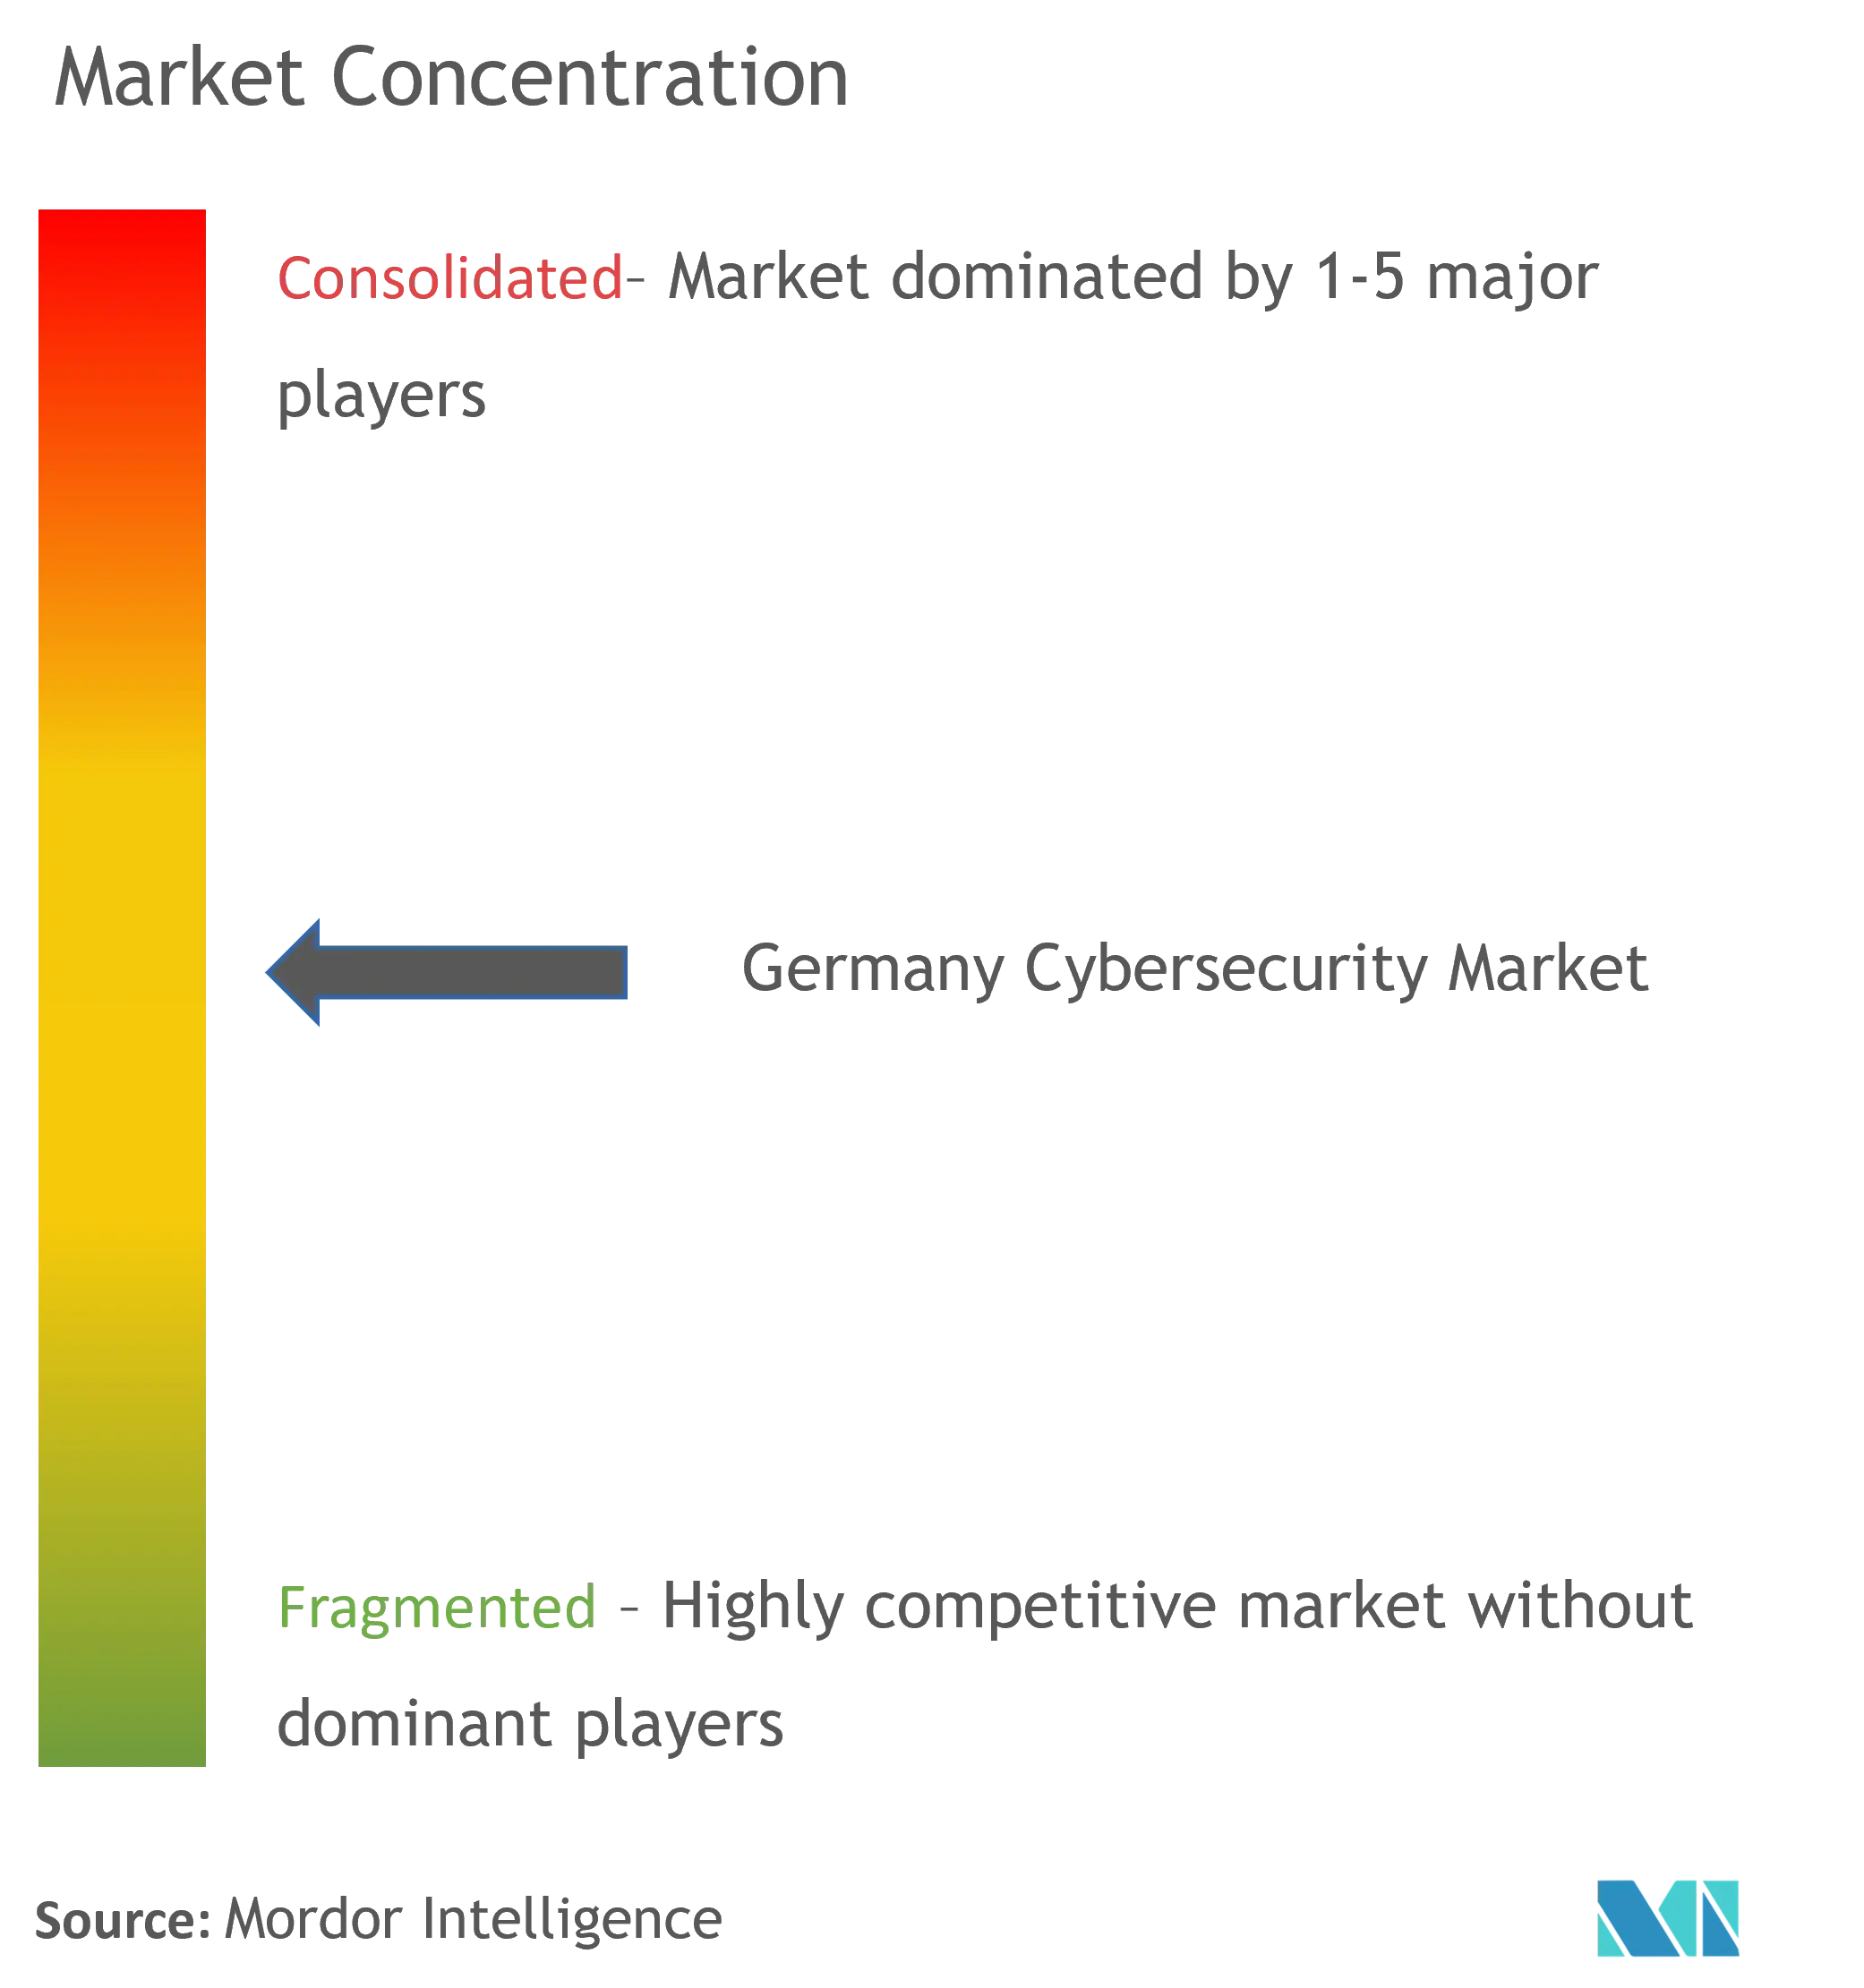 Germany Cybersecurity Market Concentration